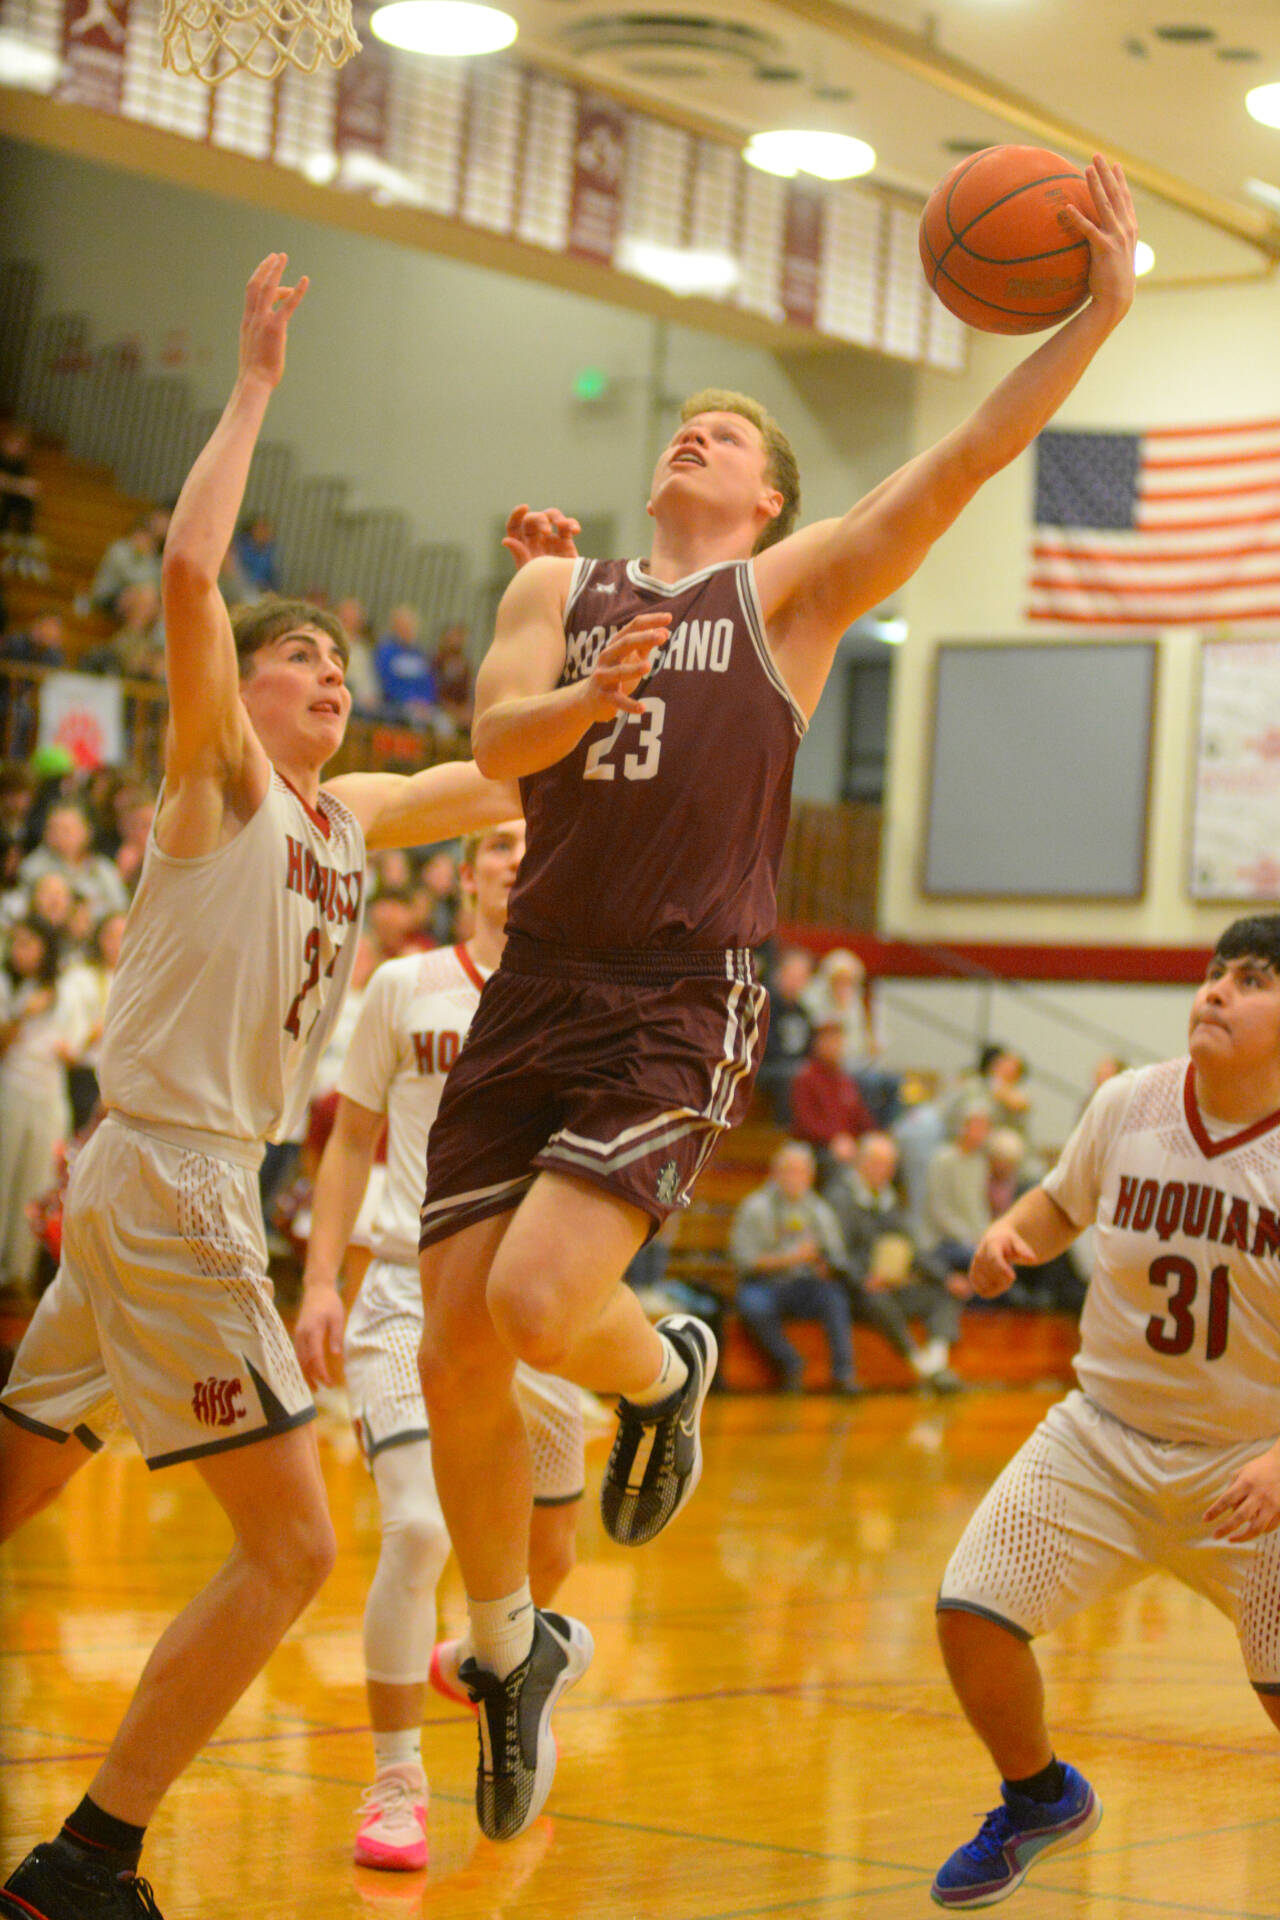 RYAN SPARKS | THE DAILY WORLD Montesano senior forward Tyce Peterson (23) drives to the basket against Hoquiam’s Chris Bryson (23) and Jose Fabian (31) during the Bulldogs’ 61-28 win over Hoquiam on Friday at Hoquiam High School.